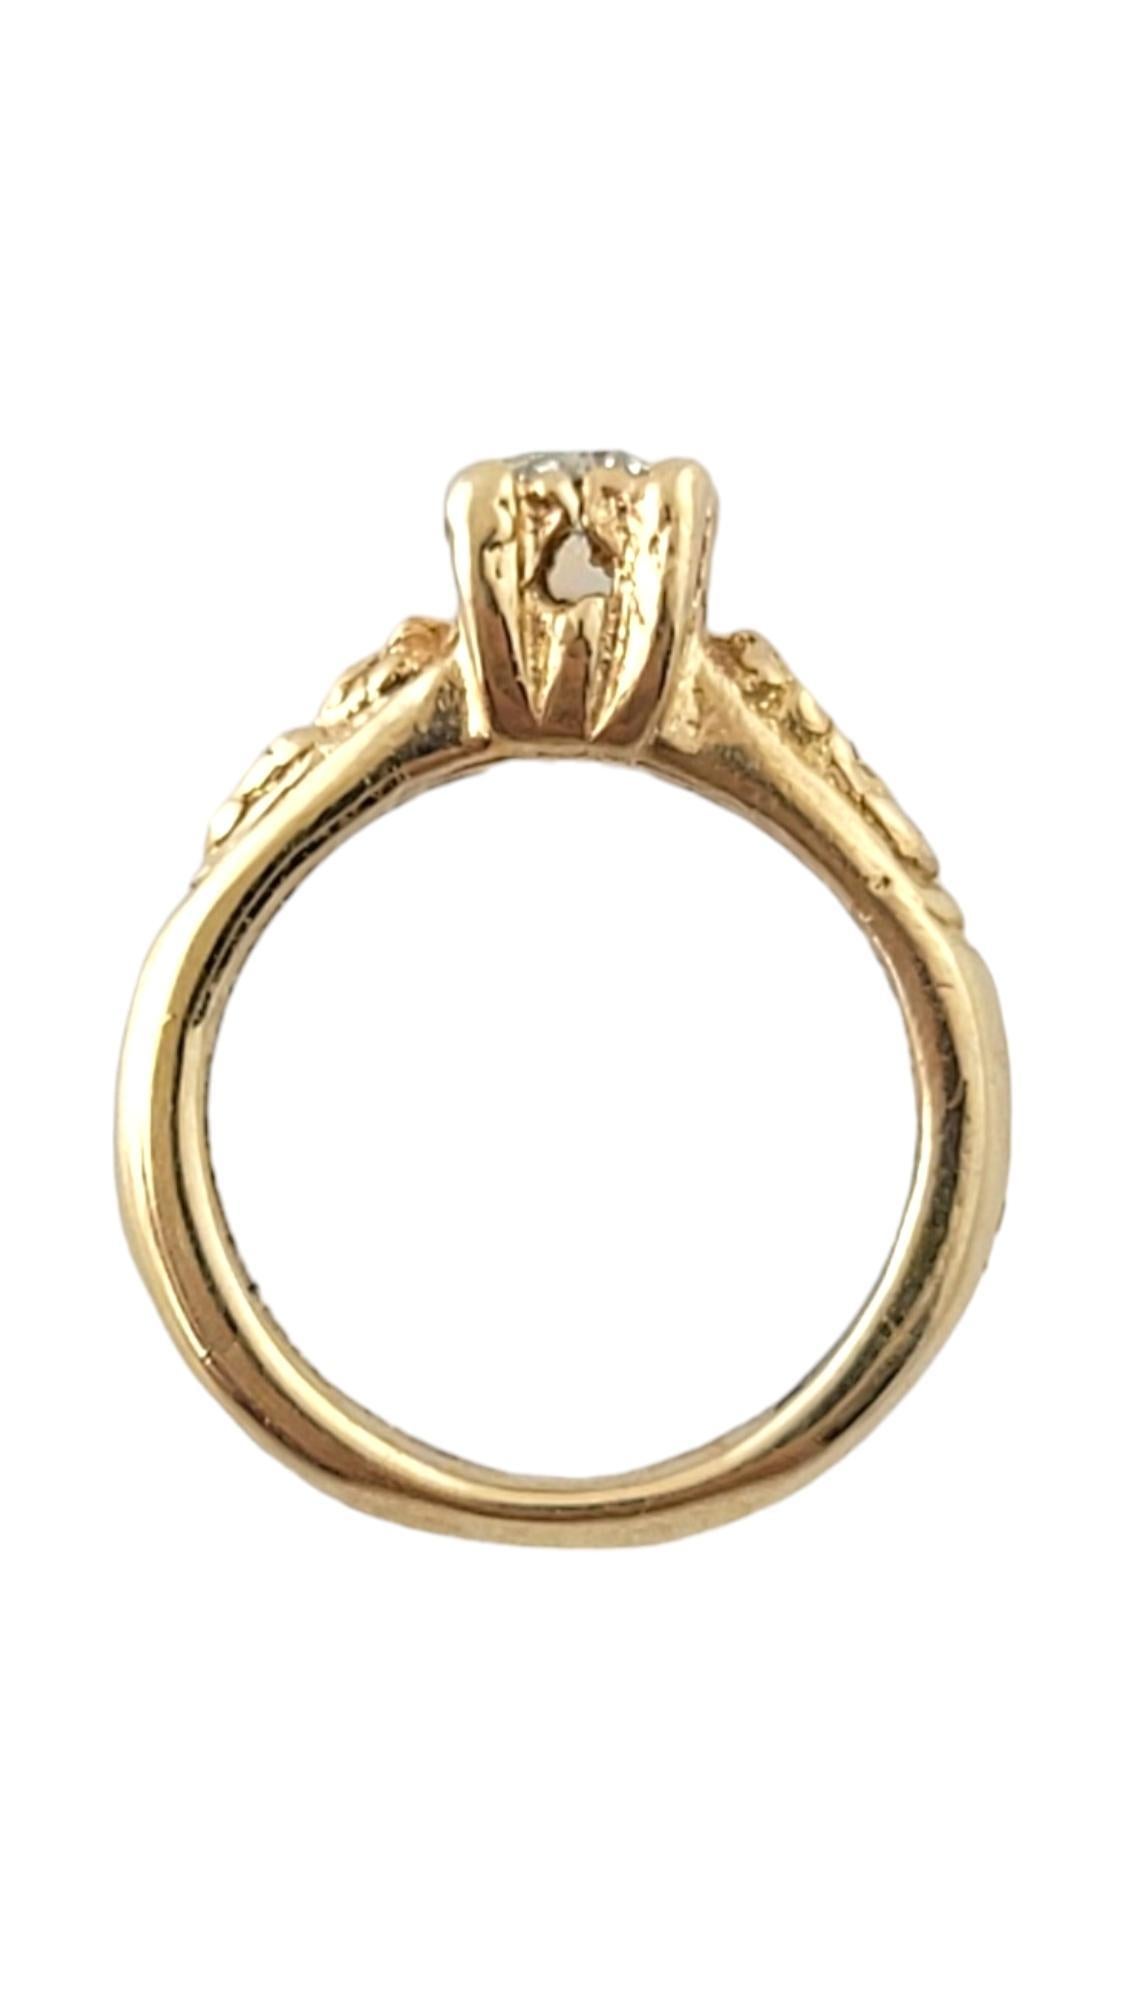 Vintage 14K Yellow Gold Engagement Ring Charm

This beautiful engagement ring charm is crafted from 14K yellow gold and features one sparkling, round brilliant cut diamond!

Approximate total diamond weight: .01 cts

Diamond color: I

Diamond